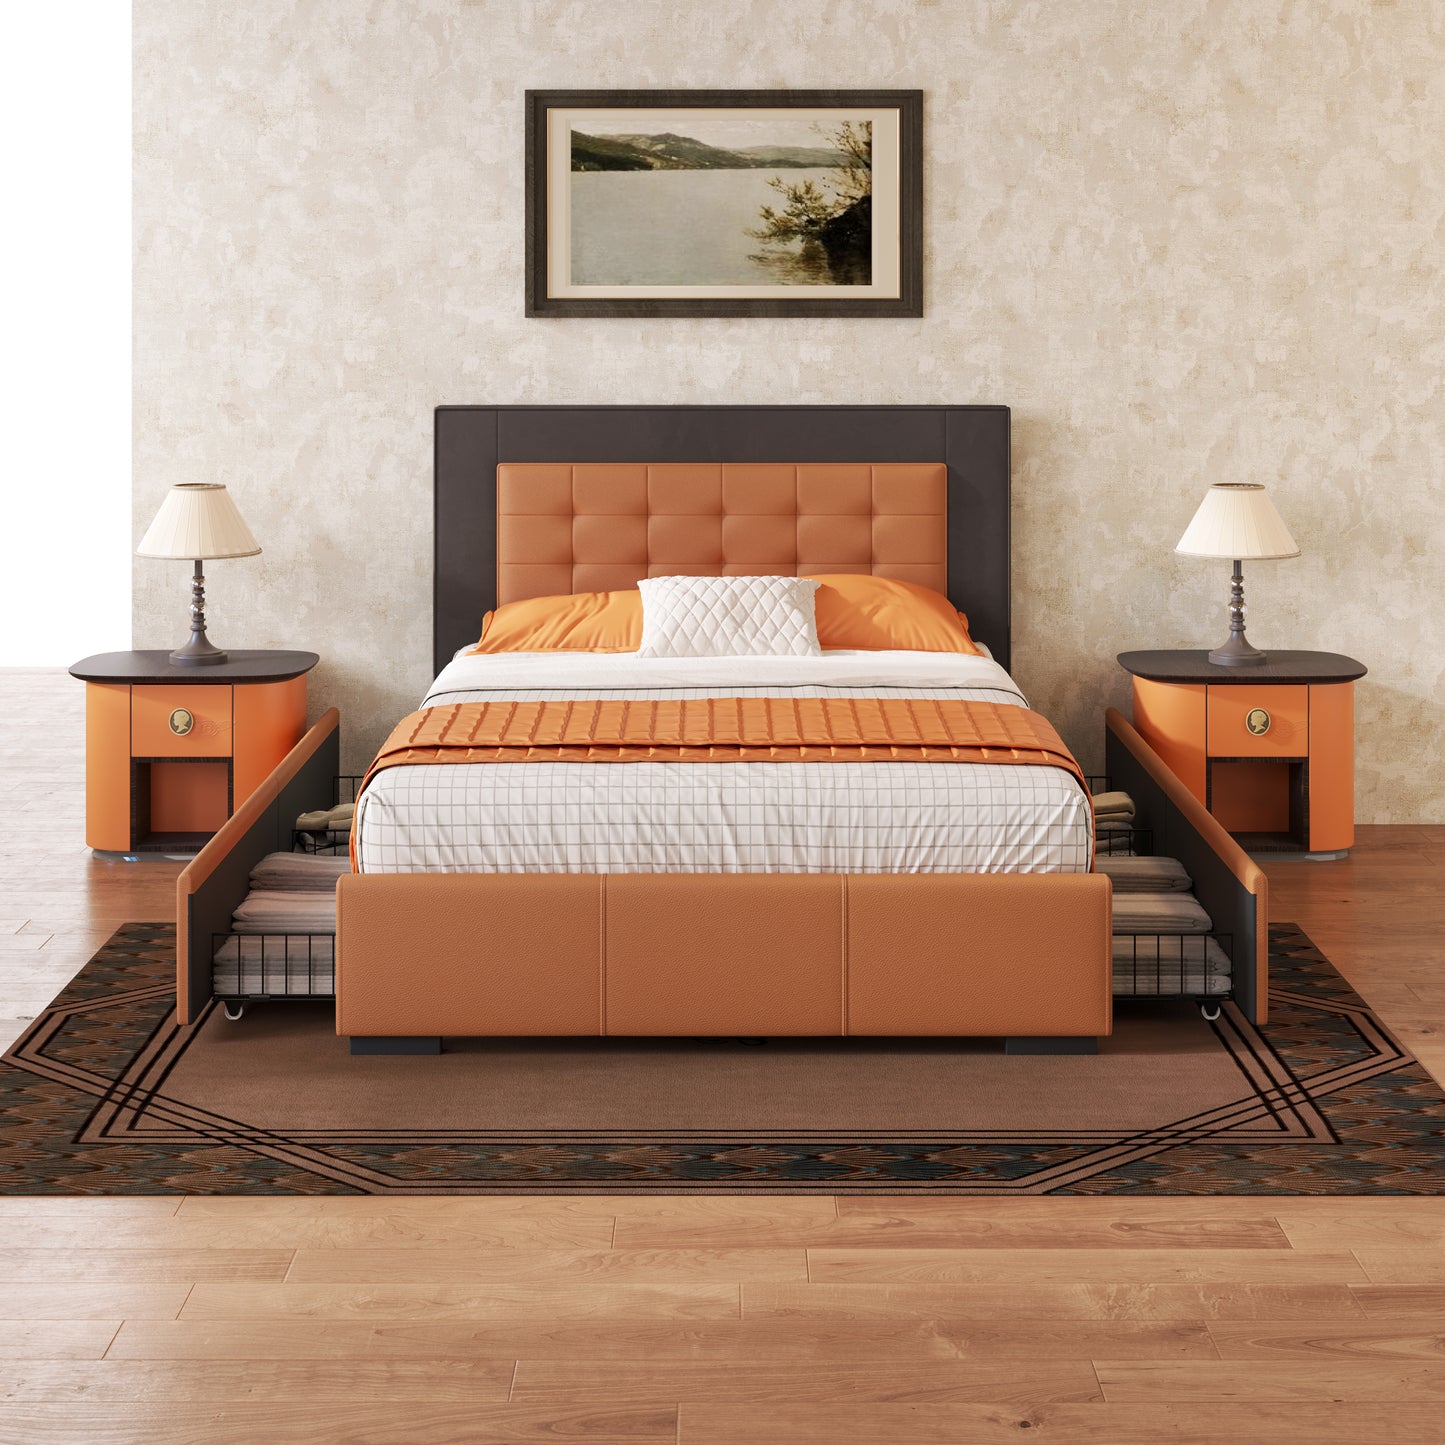 Modern Style Upholstered Queen Platform Bed Frame with Four Drawers, Button Tufted Headboard with PU Leather and Velvet, Two Color, Orange and Brown